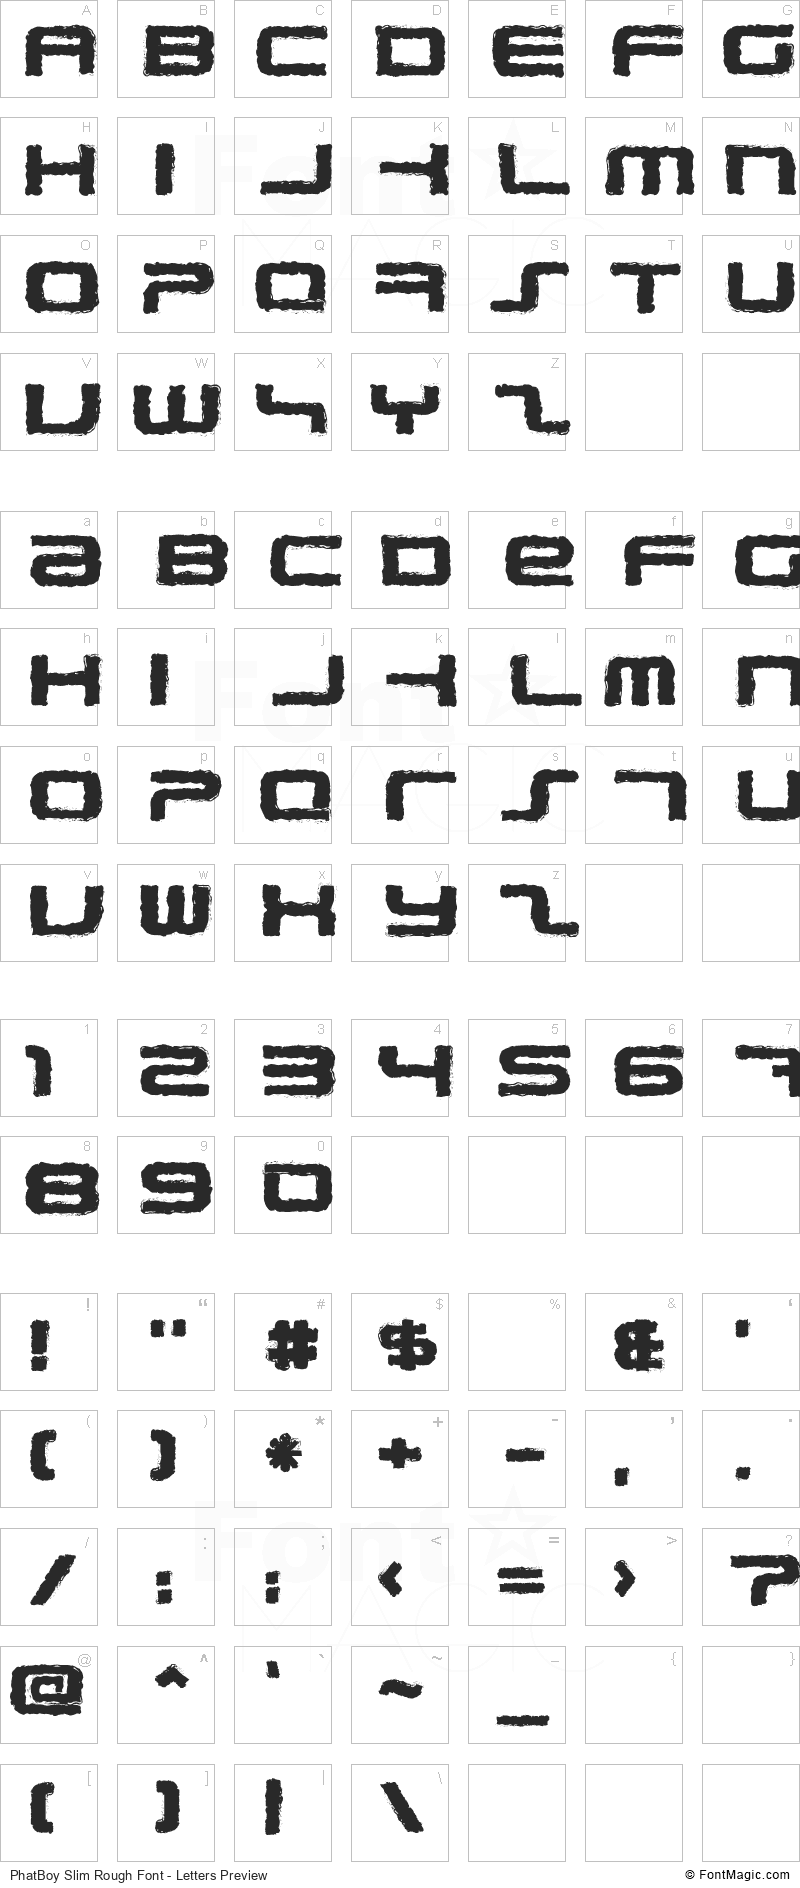 PhatBoy Slim Rough Font - All Latters Preview Chart